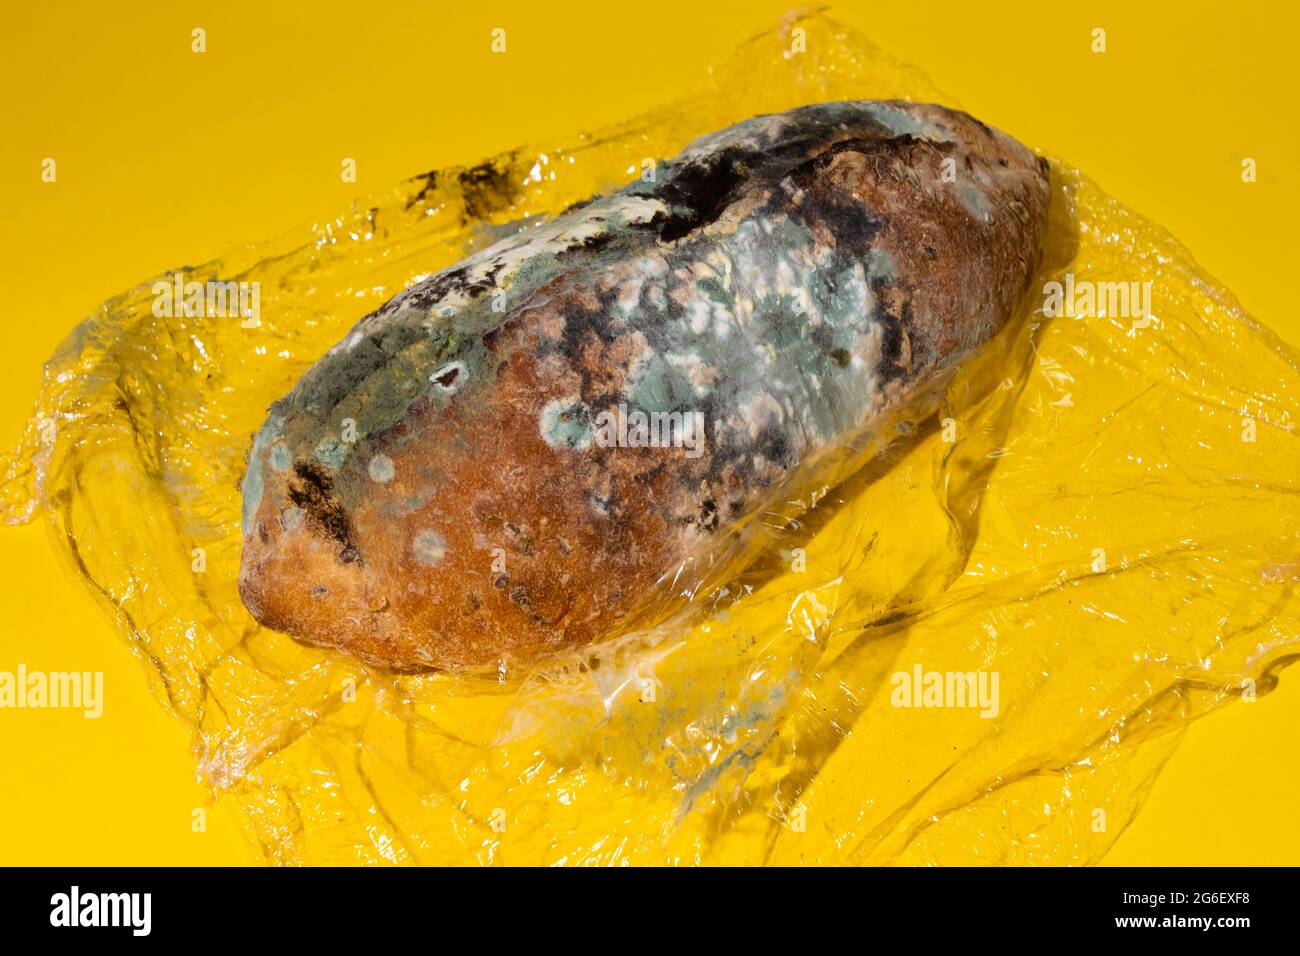 Green moldy bread on plastic wrap. Food waste and overconsumption concept. Minimalist style. Stock Photo